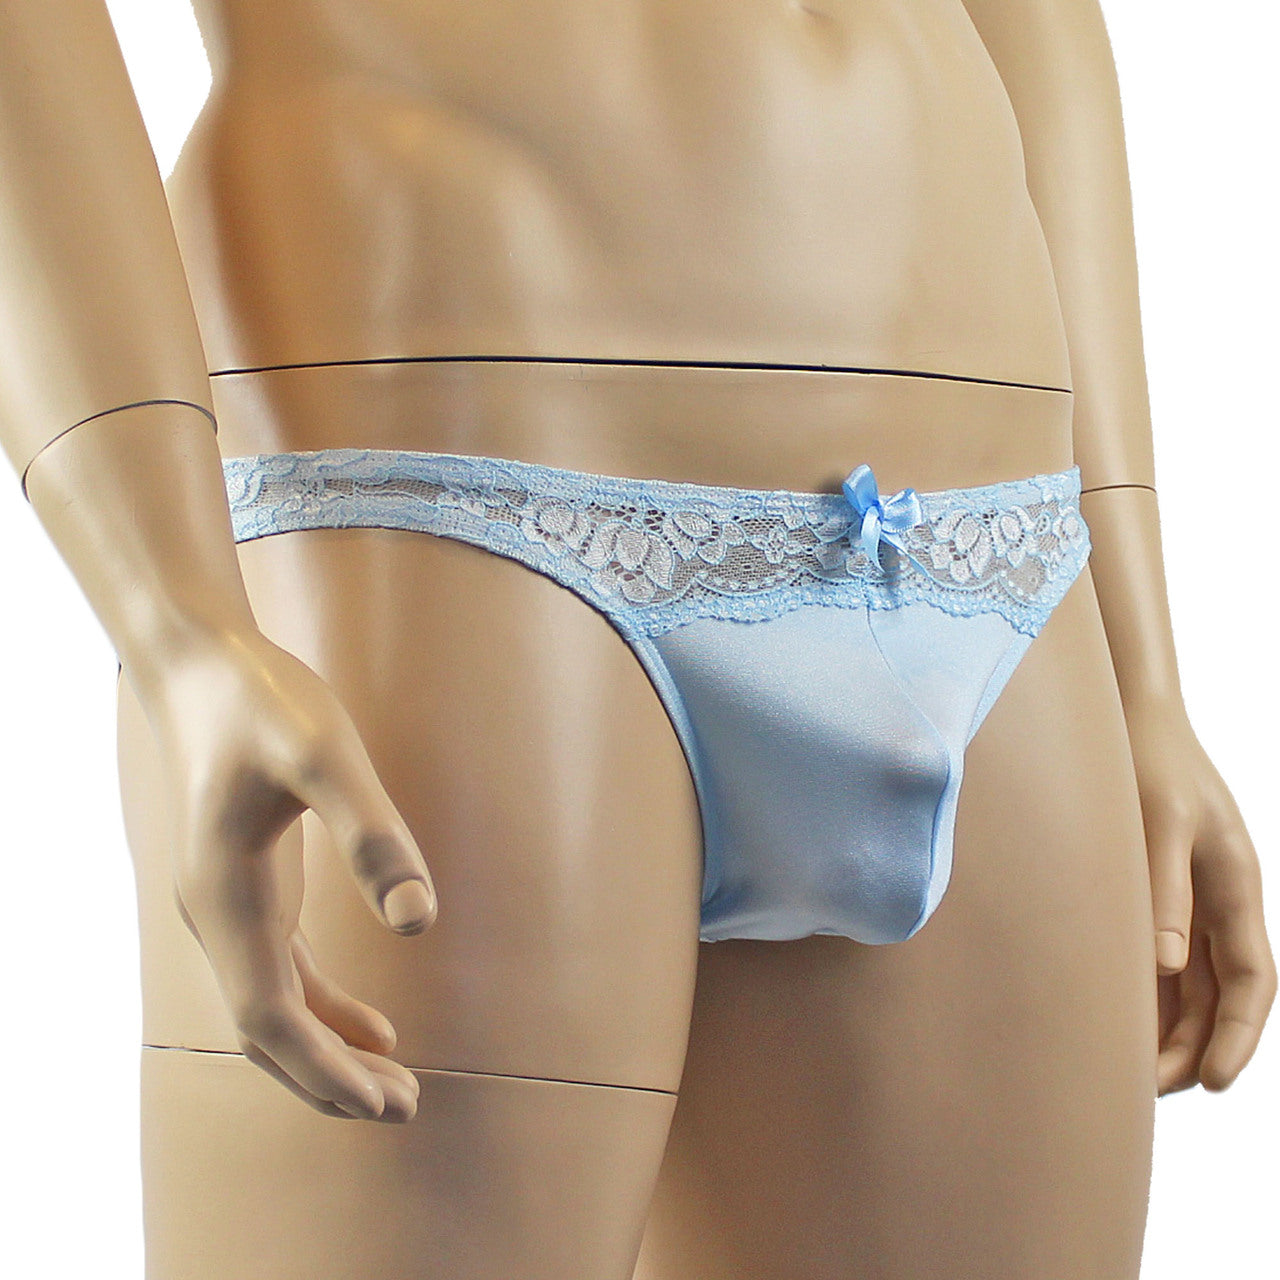 Mens Luxury Stretch Bikini Brief with Beautiful Lace Front Light Blue